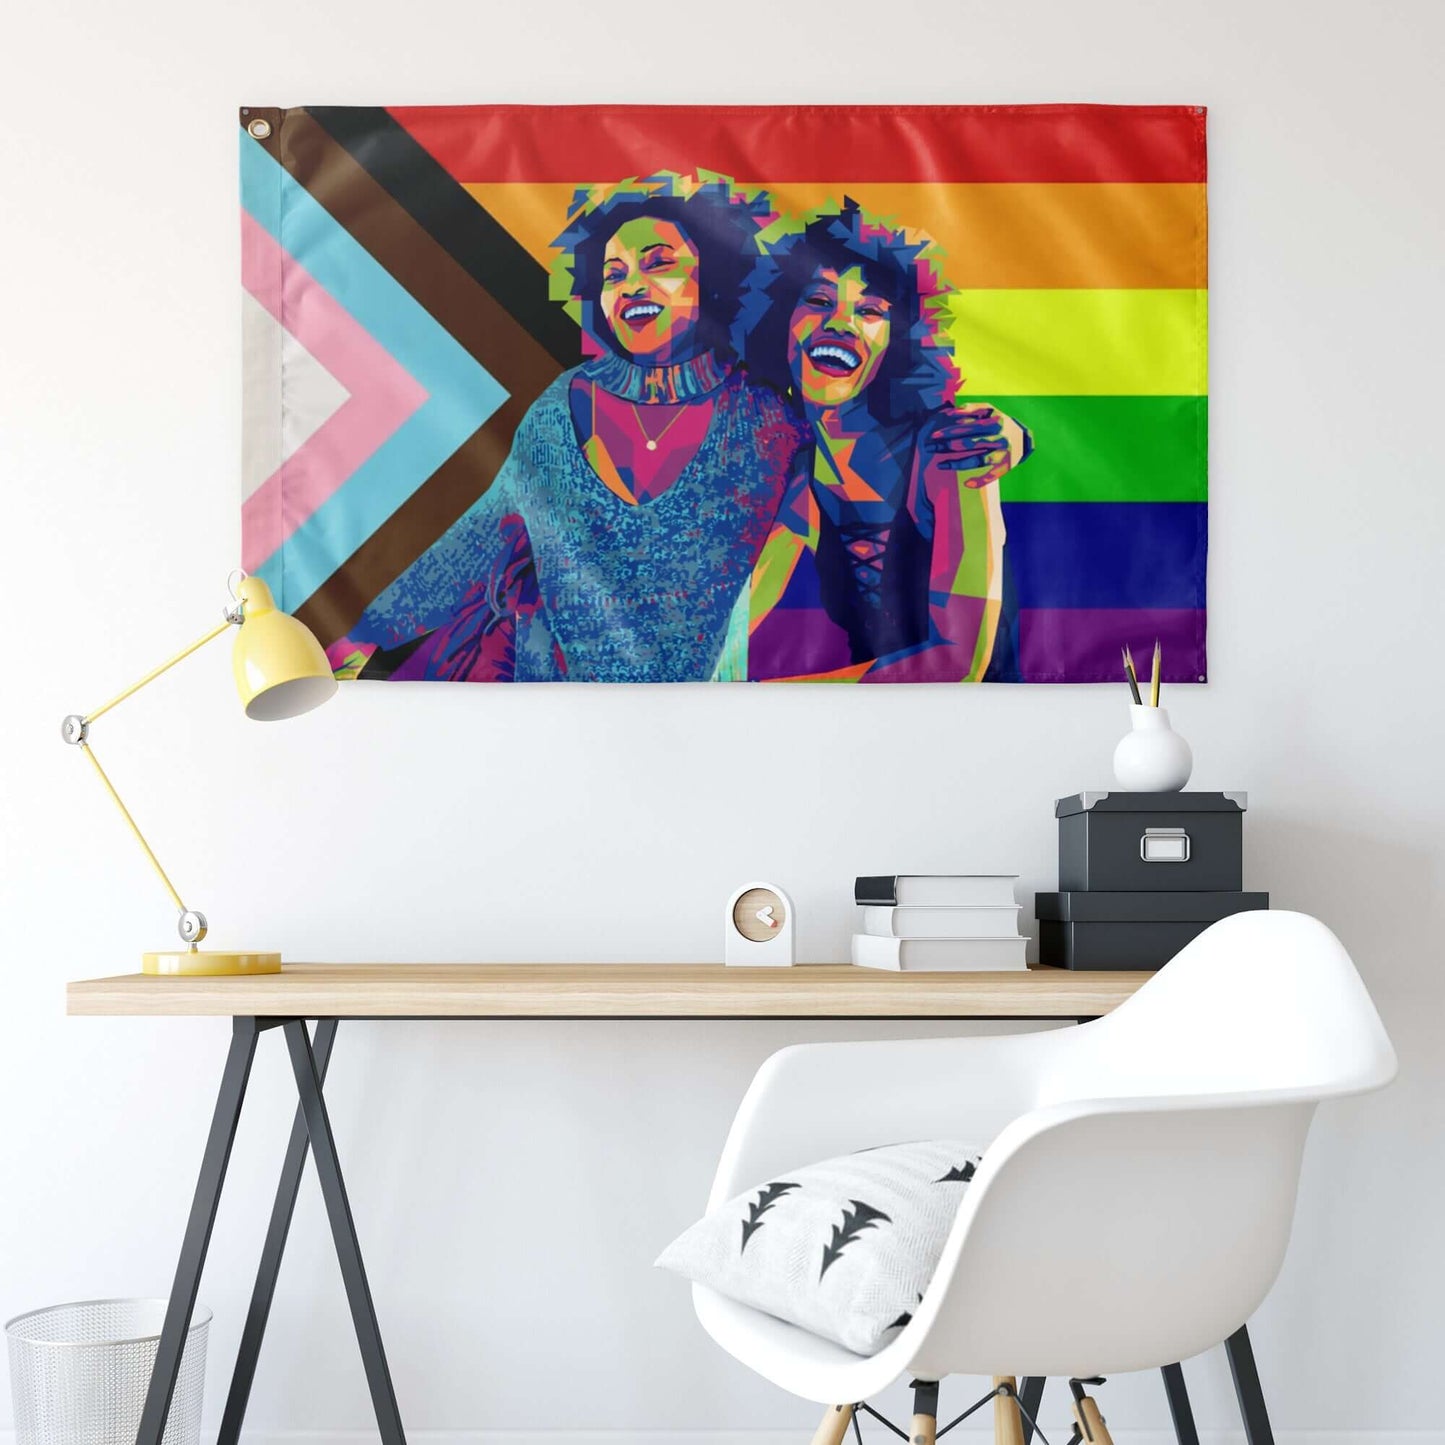 Your Face Painted On A Pride Flag - Handmade Pride Art Flag Els PW 9885, flag, flags, merch, paint, painting, pride, pride paint, rainbow, square  thepridecolors